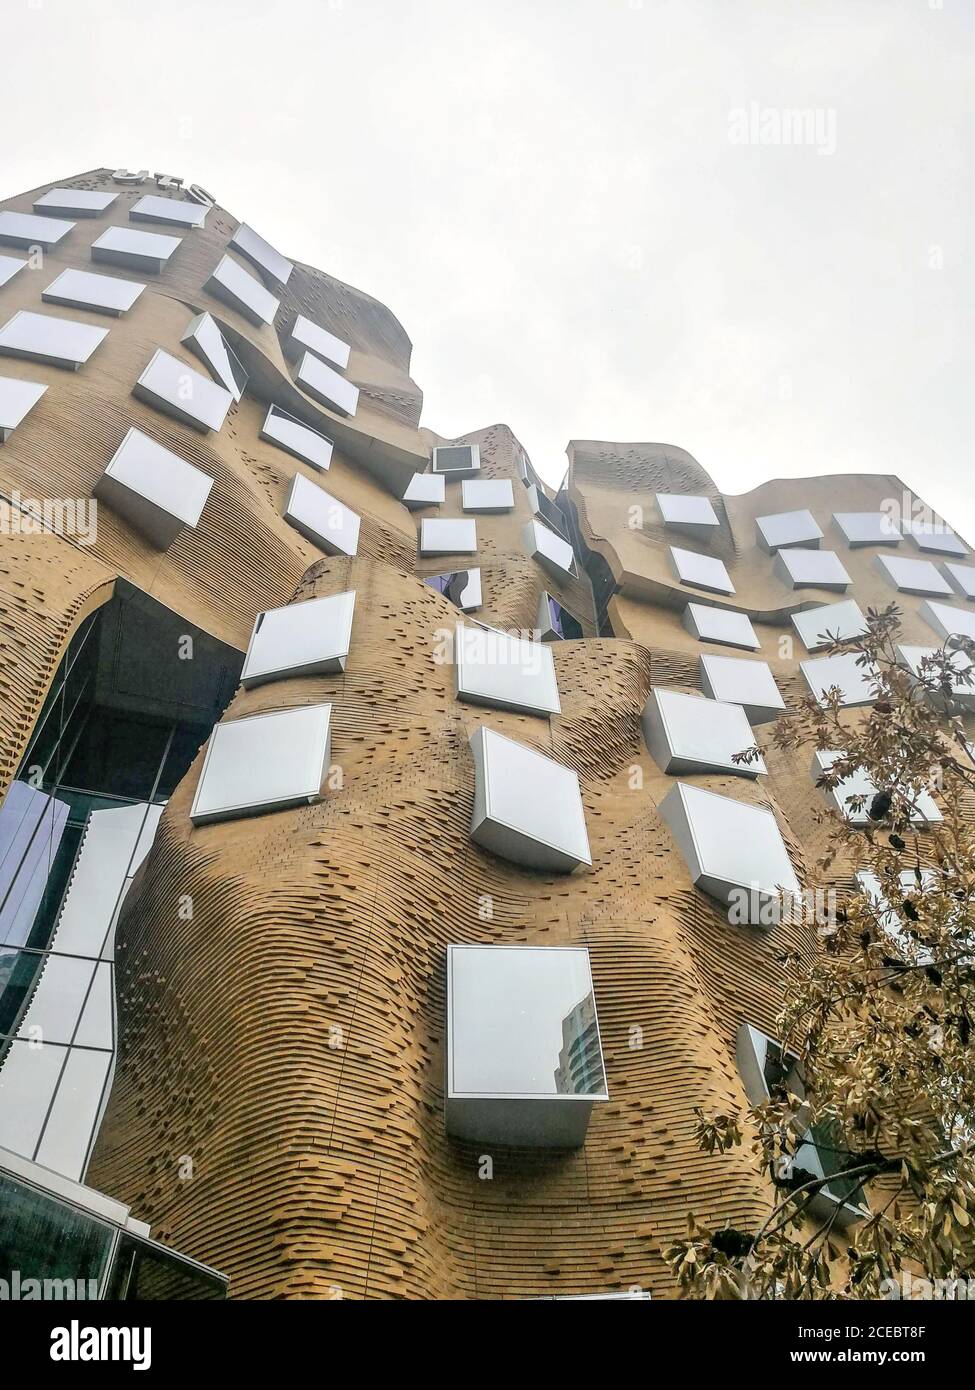 Frank Gehry's First and Only Australian Project